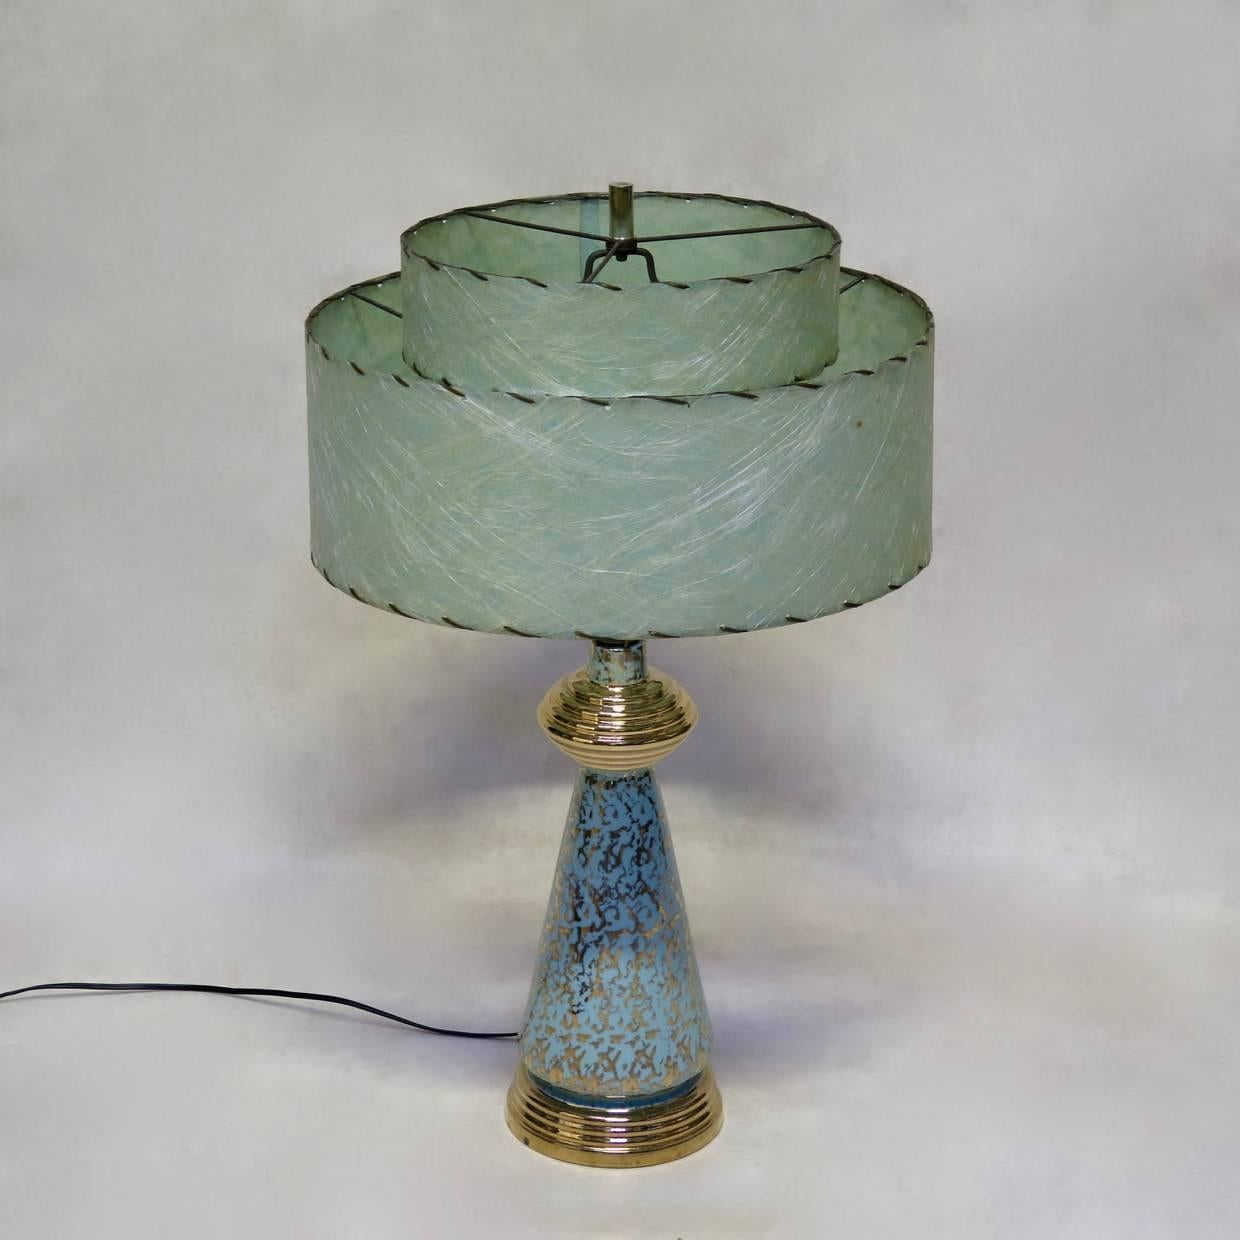 Delightful and rather crazy pair of tall table lamps with a porcelain base, with light duck-egg blue glaze, speckled with gold. The lovely (original), double-tiered, pale green shades are of thick paper stitched onto wire frames and show Fine,